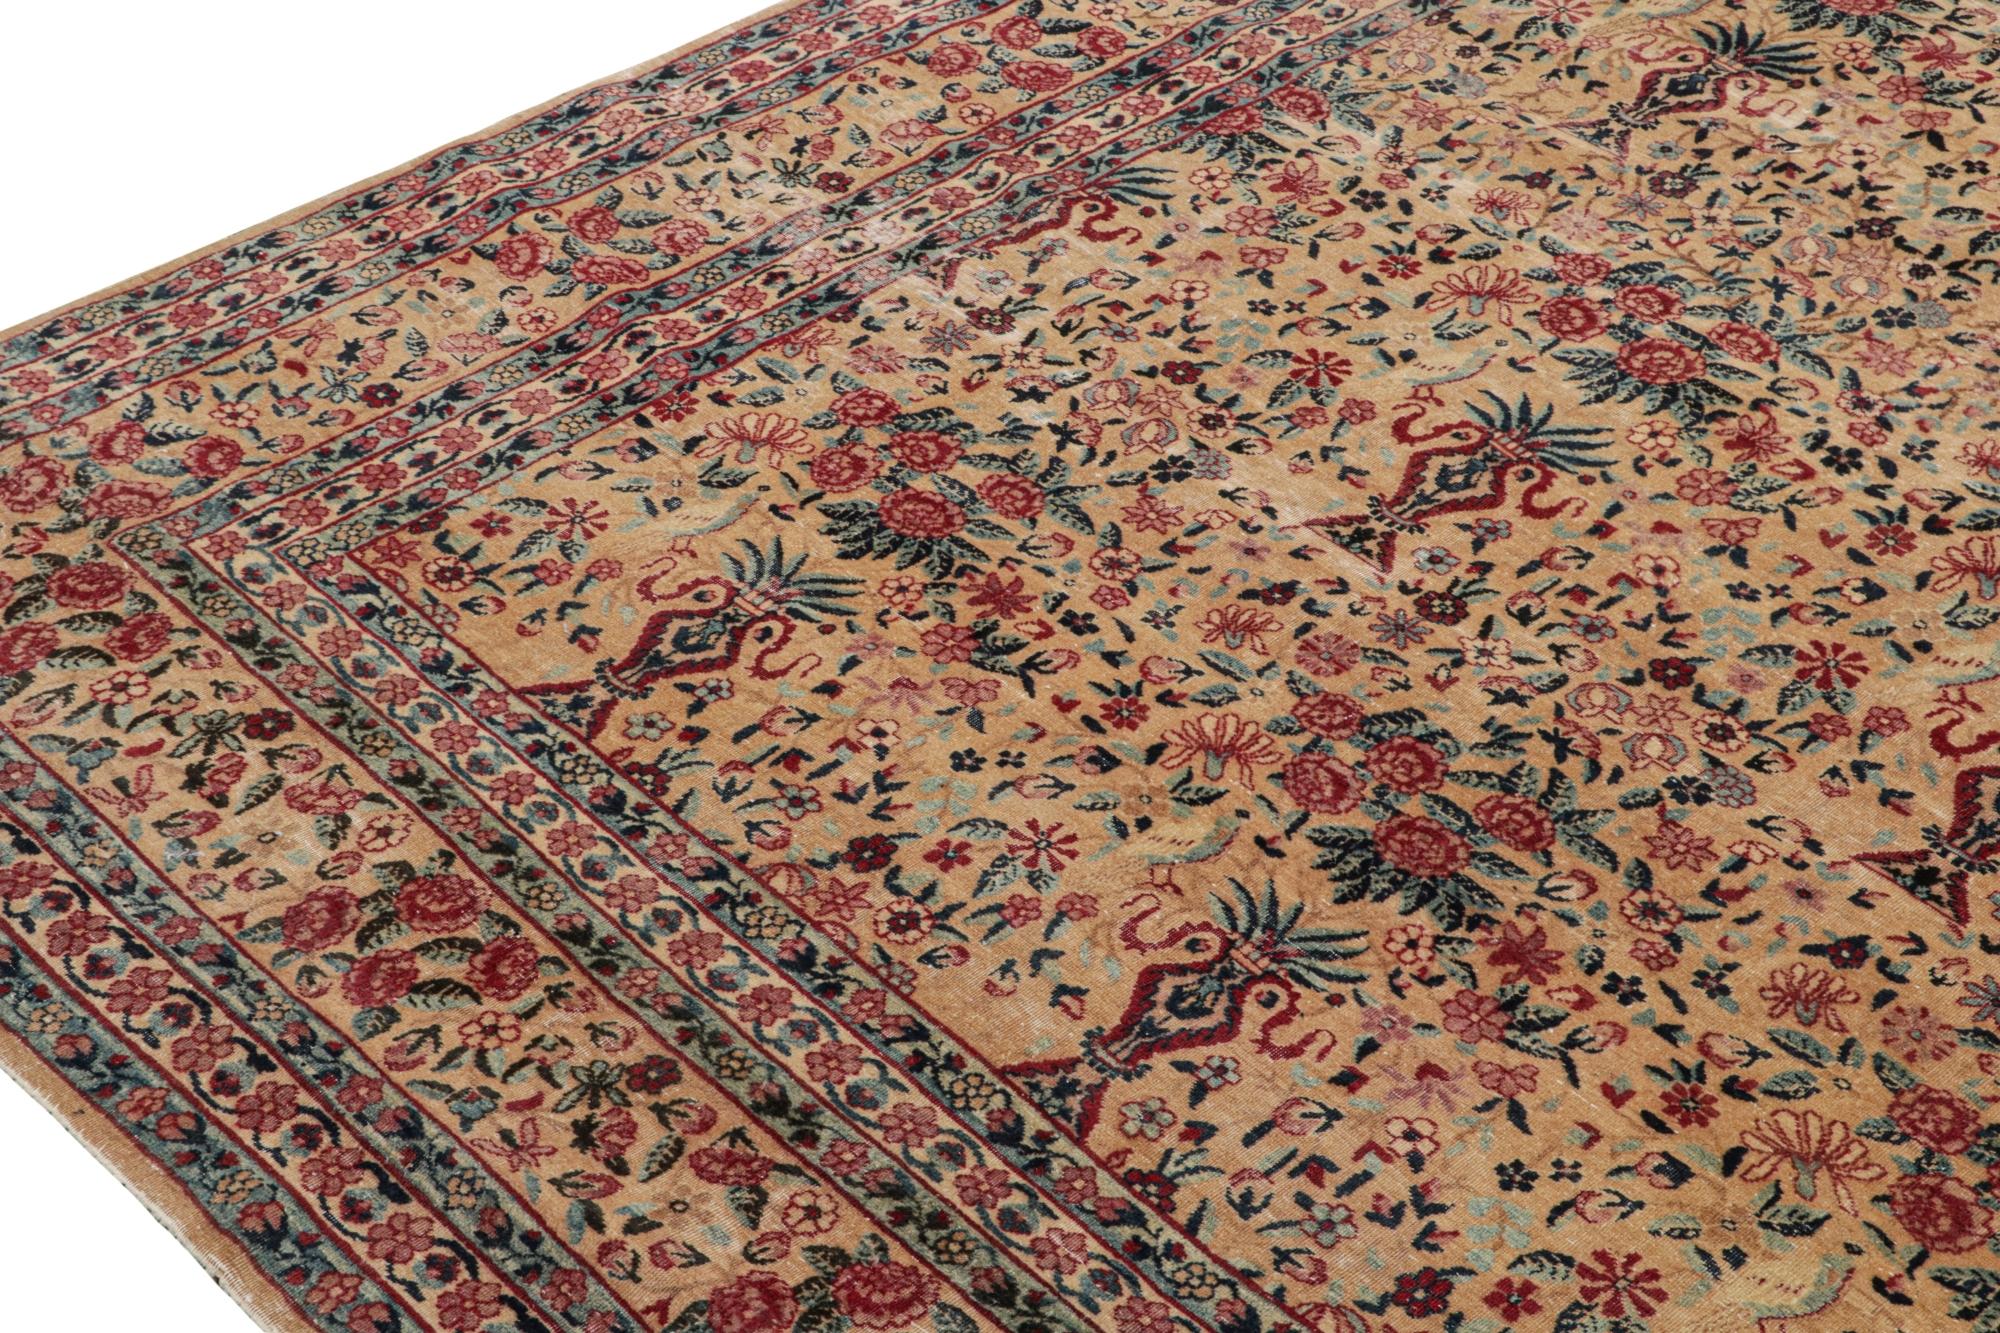 Wool Rare Antique Kerman Lavar Persian Rug with Floral Patterns, from Rug & Kilim For Sale